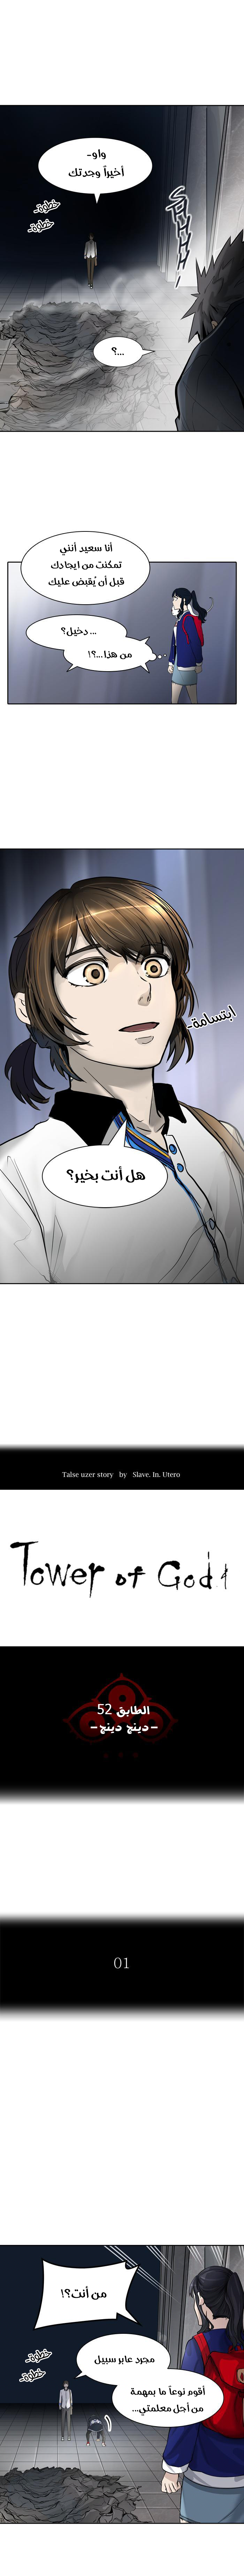 Tower of God S3: Chapter 2 - Page 1